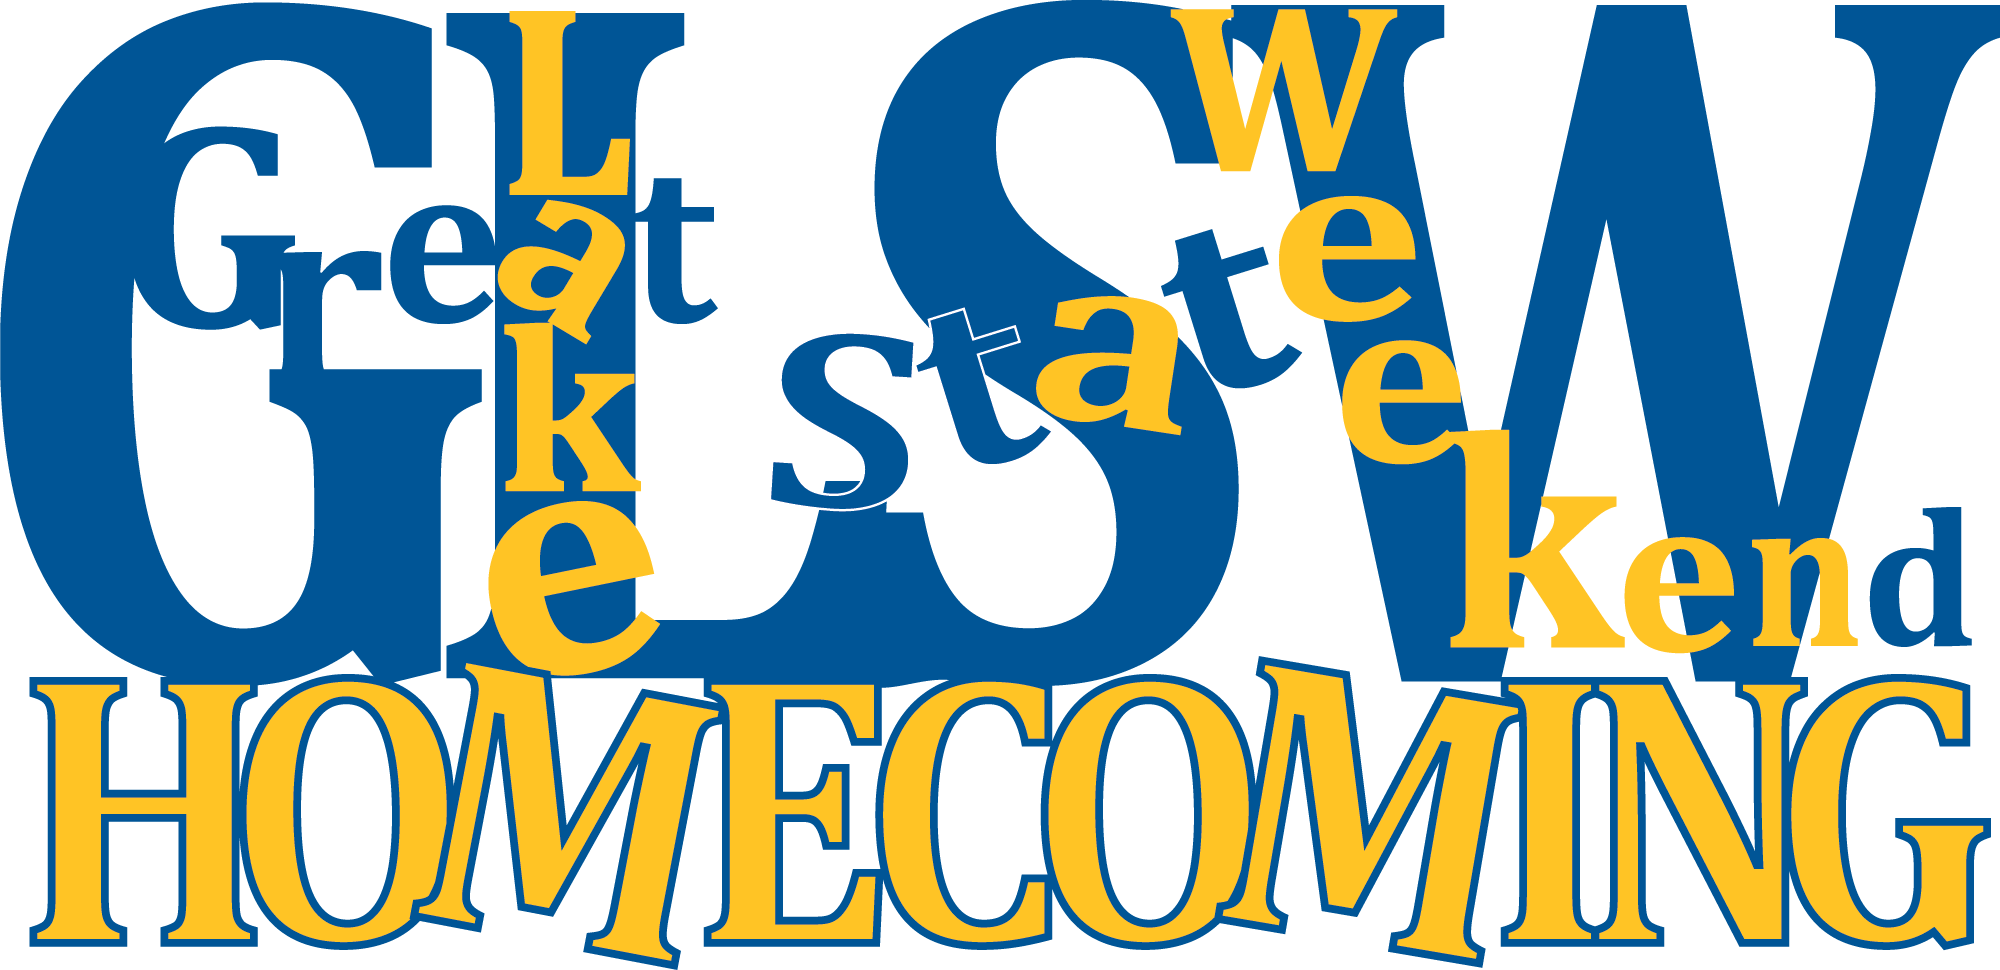 homecoming clipart blue gold